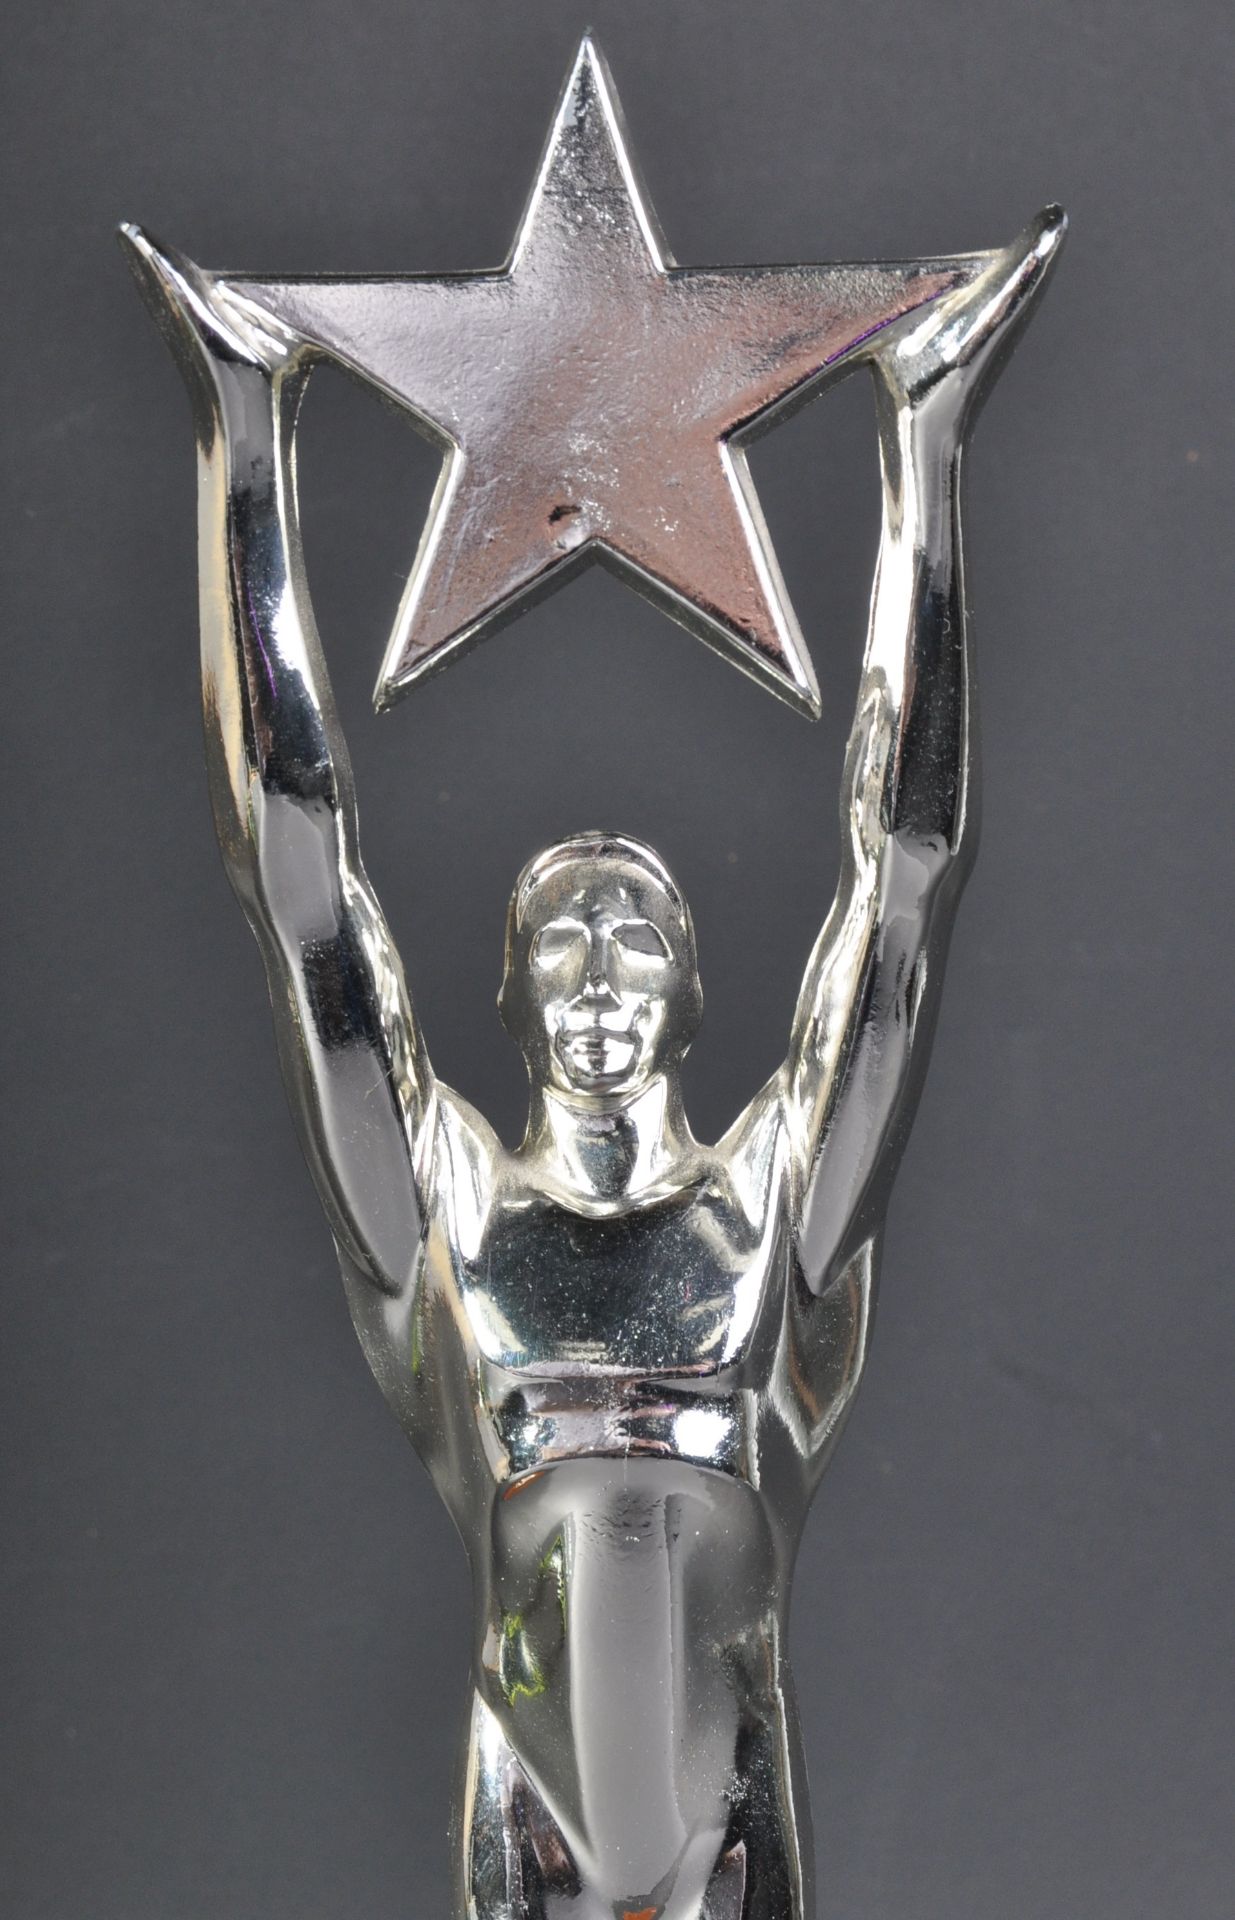 ESTATE OF JEREMY BULLOCH - PERSONAL APPEARANCE AWARD TROPHY - Image 4 of 4